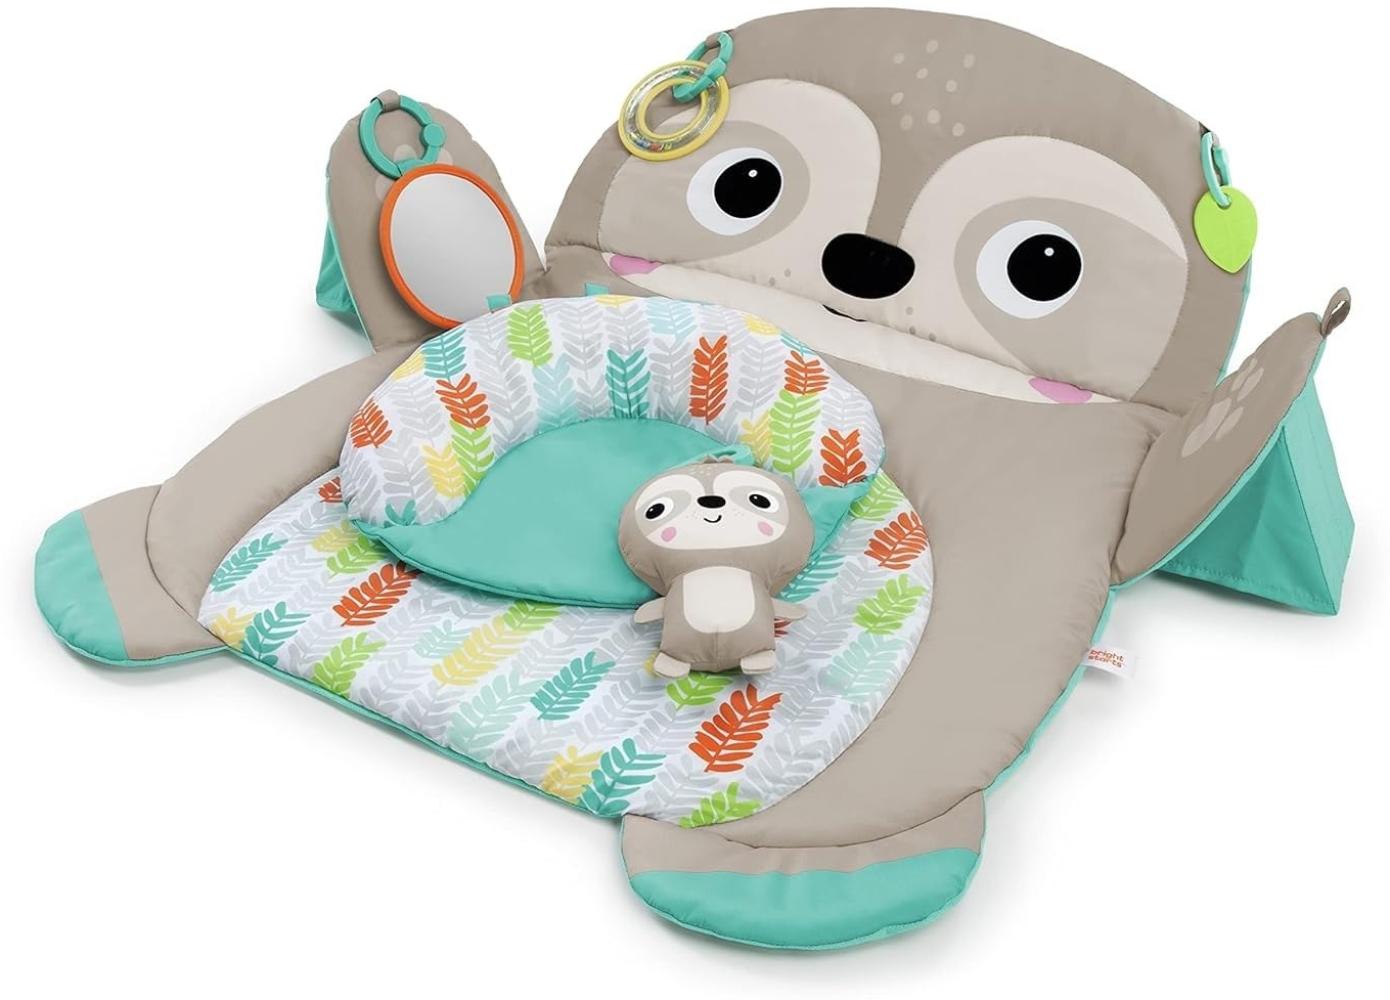 Bright Starts, Tummy Time Prop & Play Oversized Baby Activity Gym, Large Playmat, 4 Removable Toys and Support Cushion, Machine Washable, Easy to Store, Age Newborn and up, Sloth Bild 1